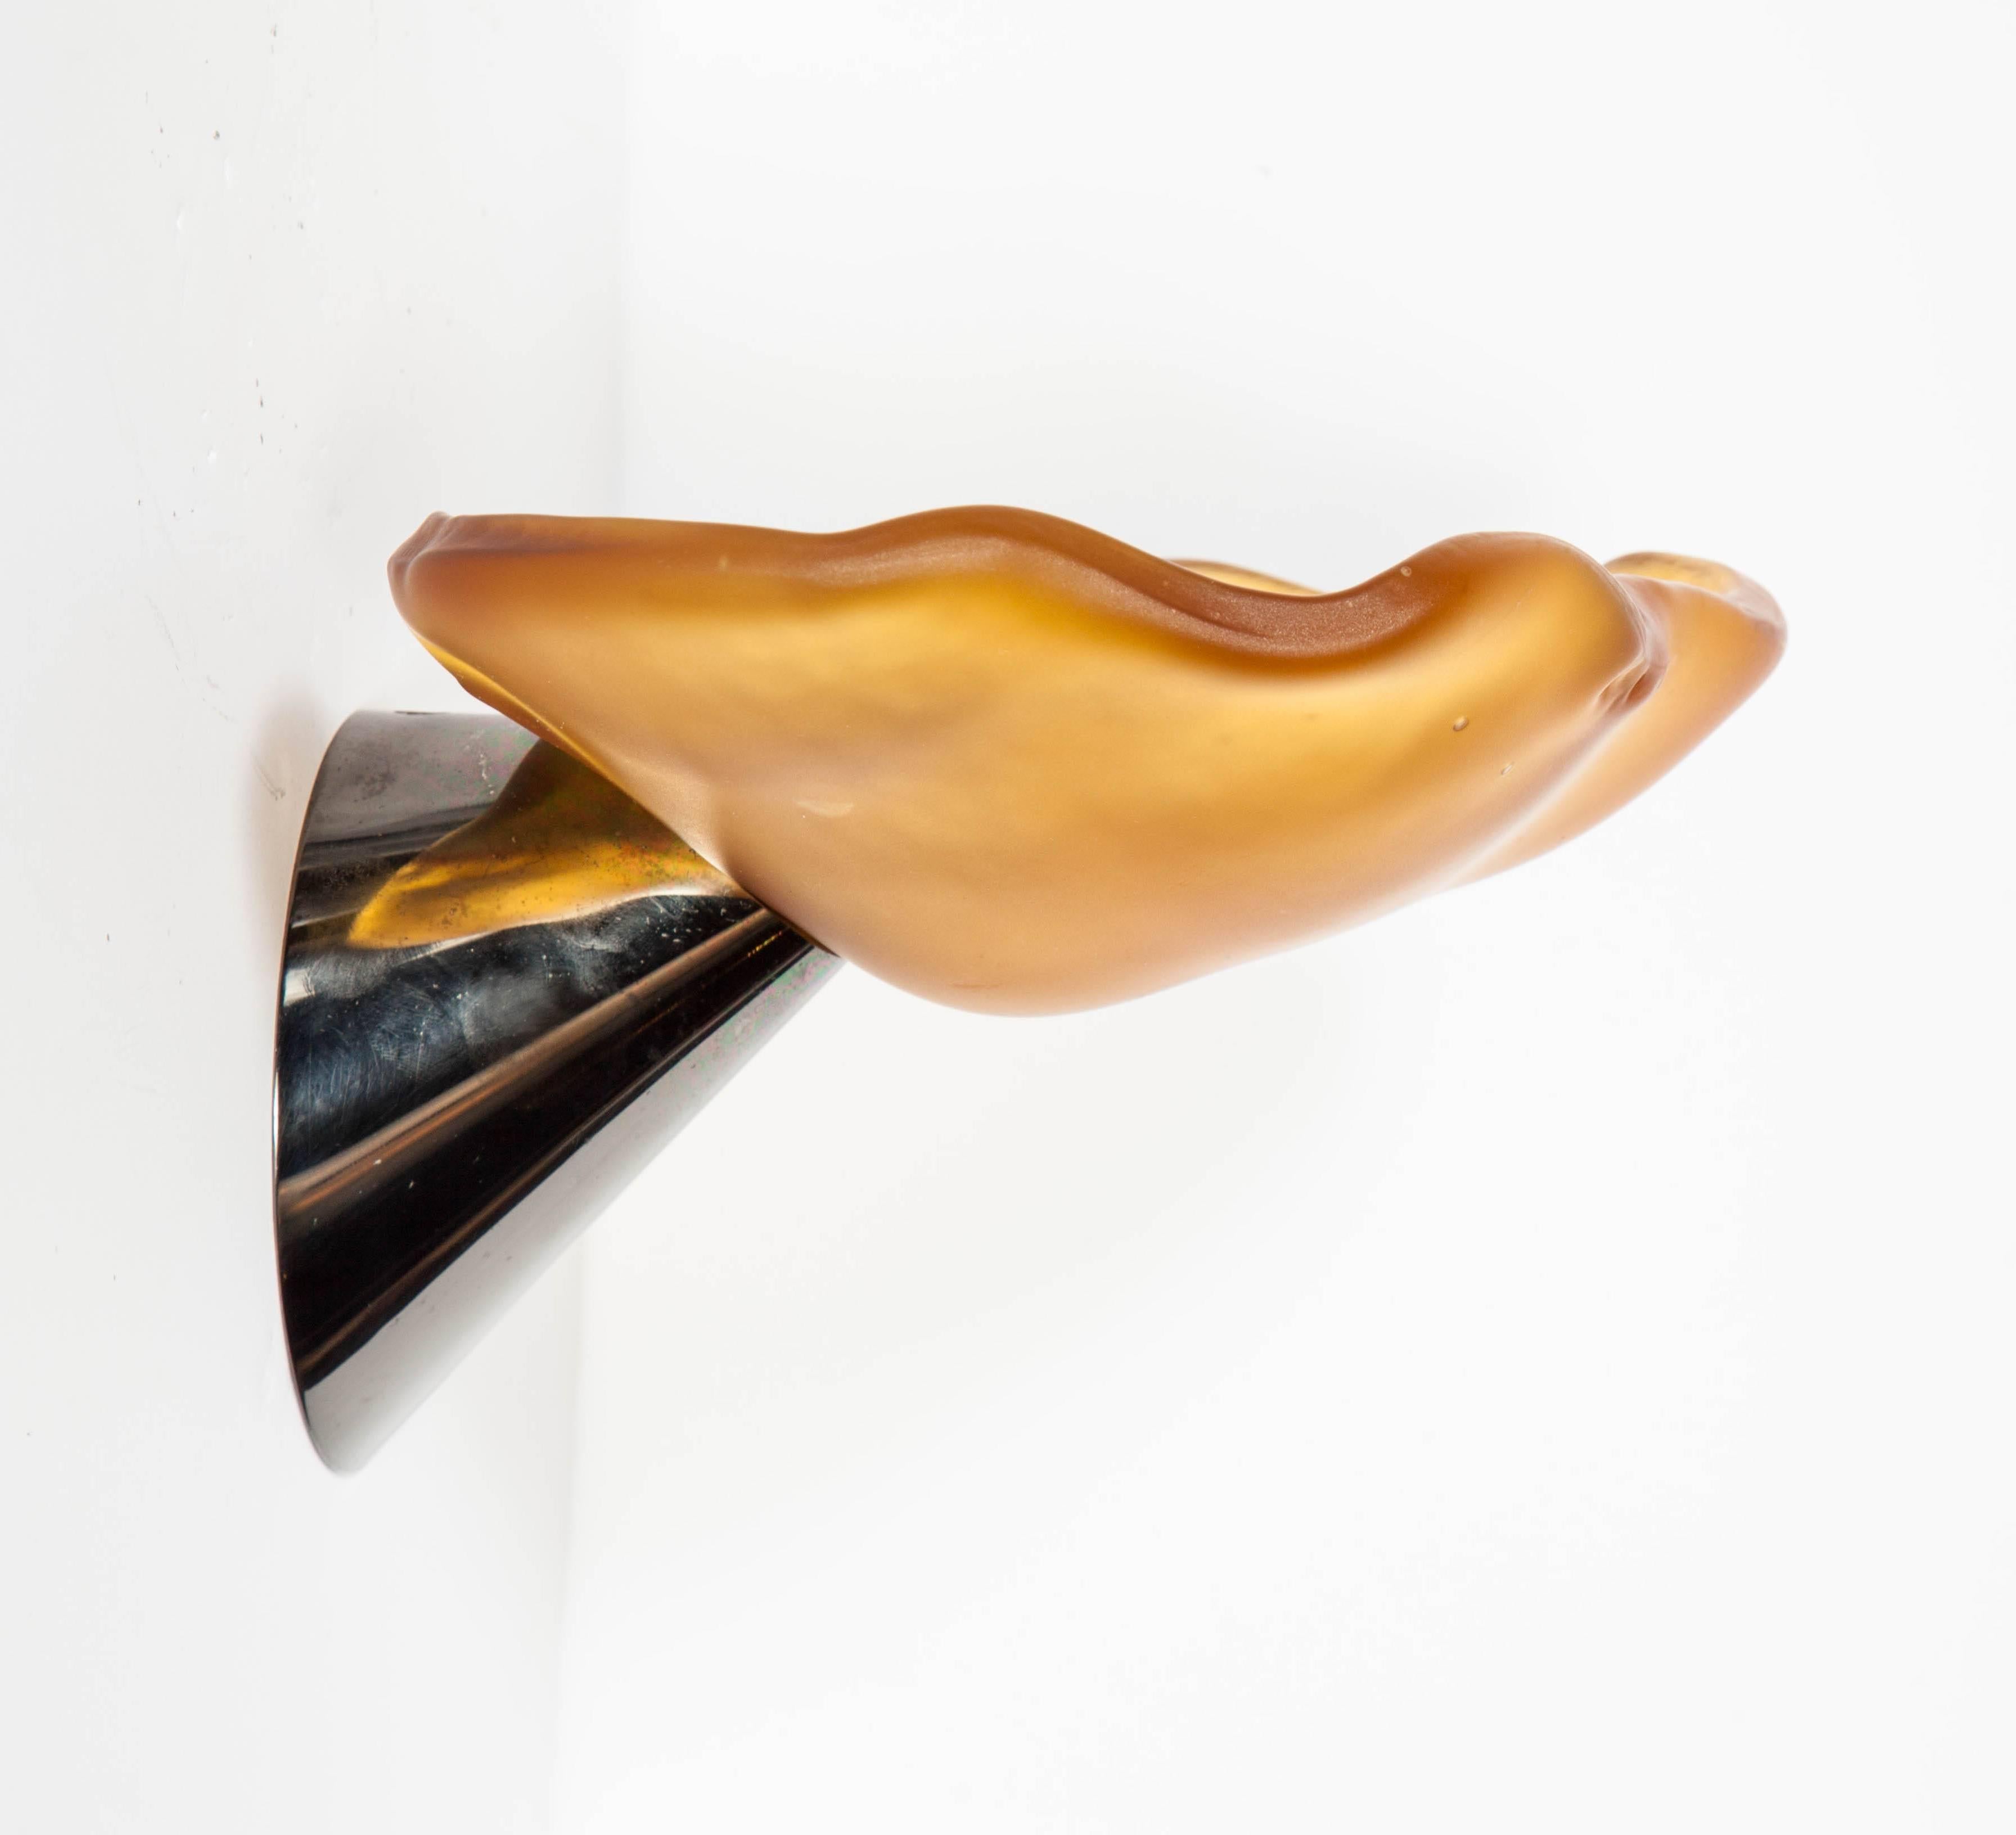 Pair of vintage Postmodern sconces with Art Nouveau inspired design. The sconces feature handblown Murano glass shades in amber with free-form water lily design. The sconces also have gunmetal tapered cone shaped bases. Fitted with one light each,